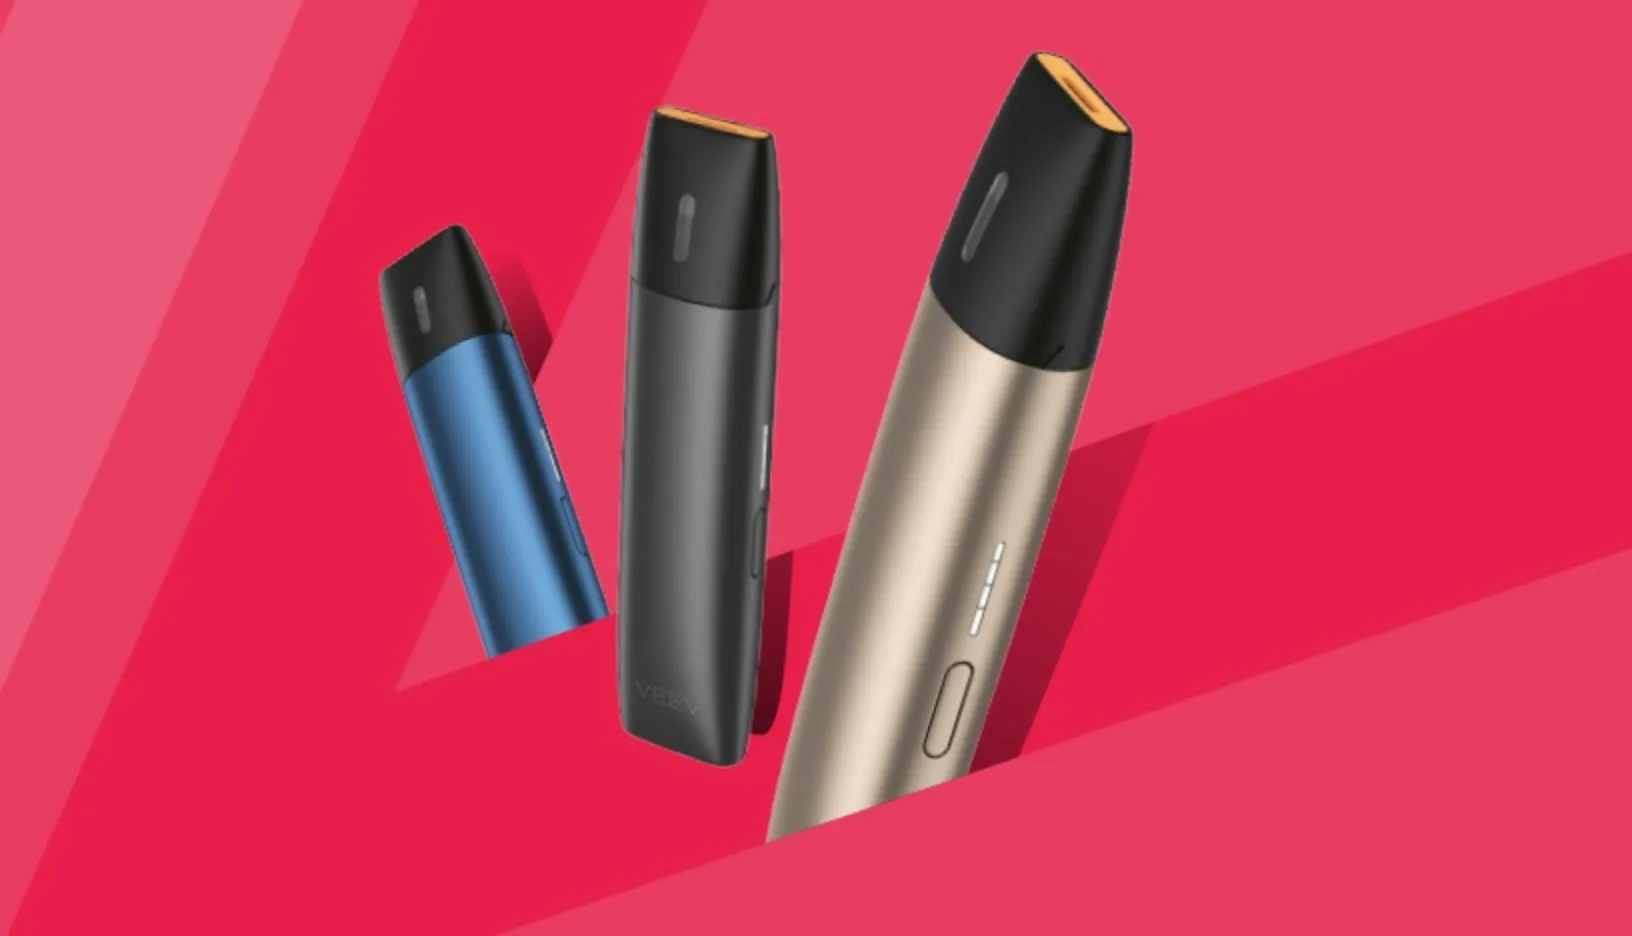 VEEV vaping devices in 5 colors on blue background